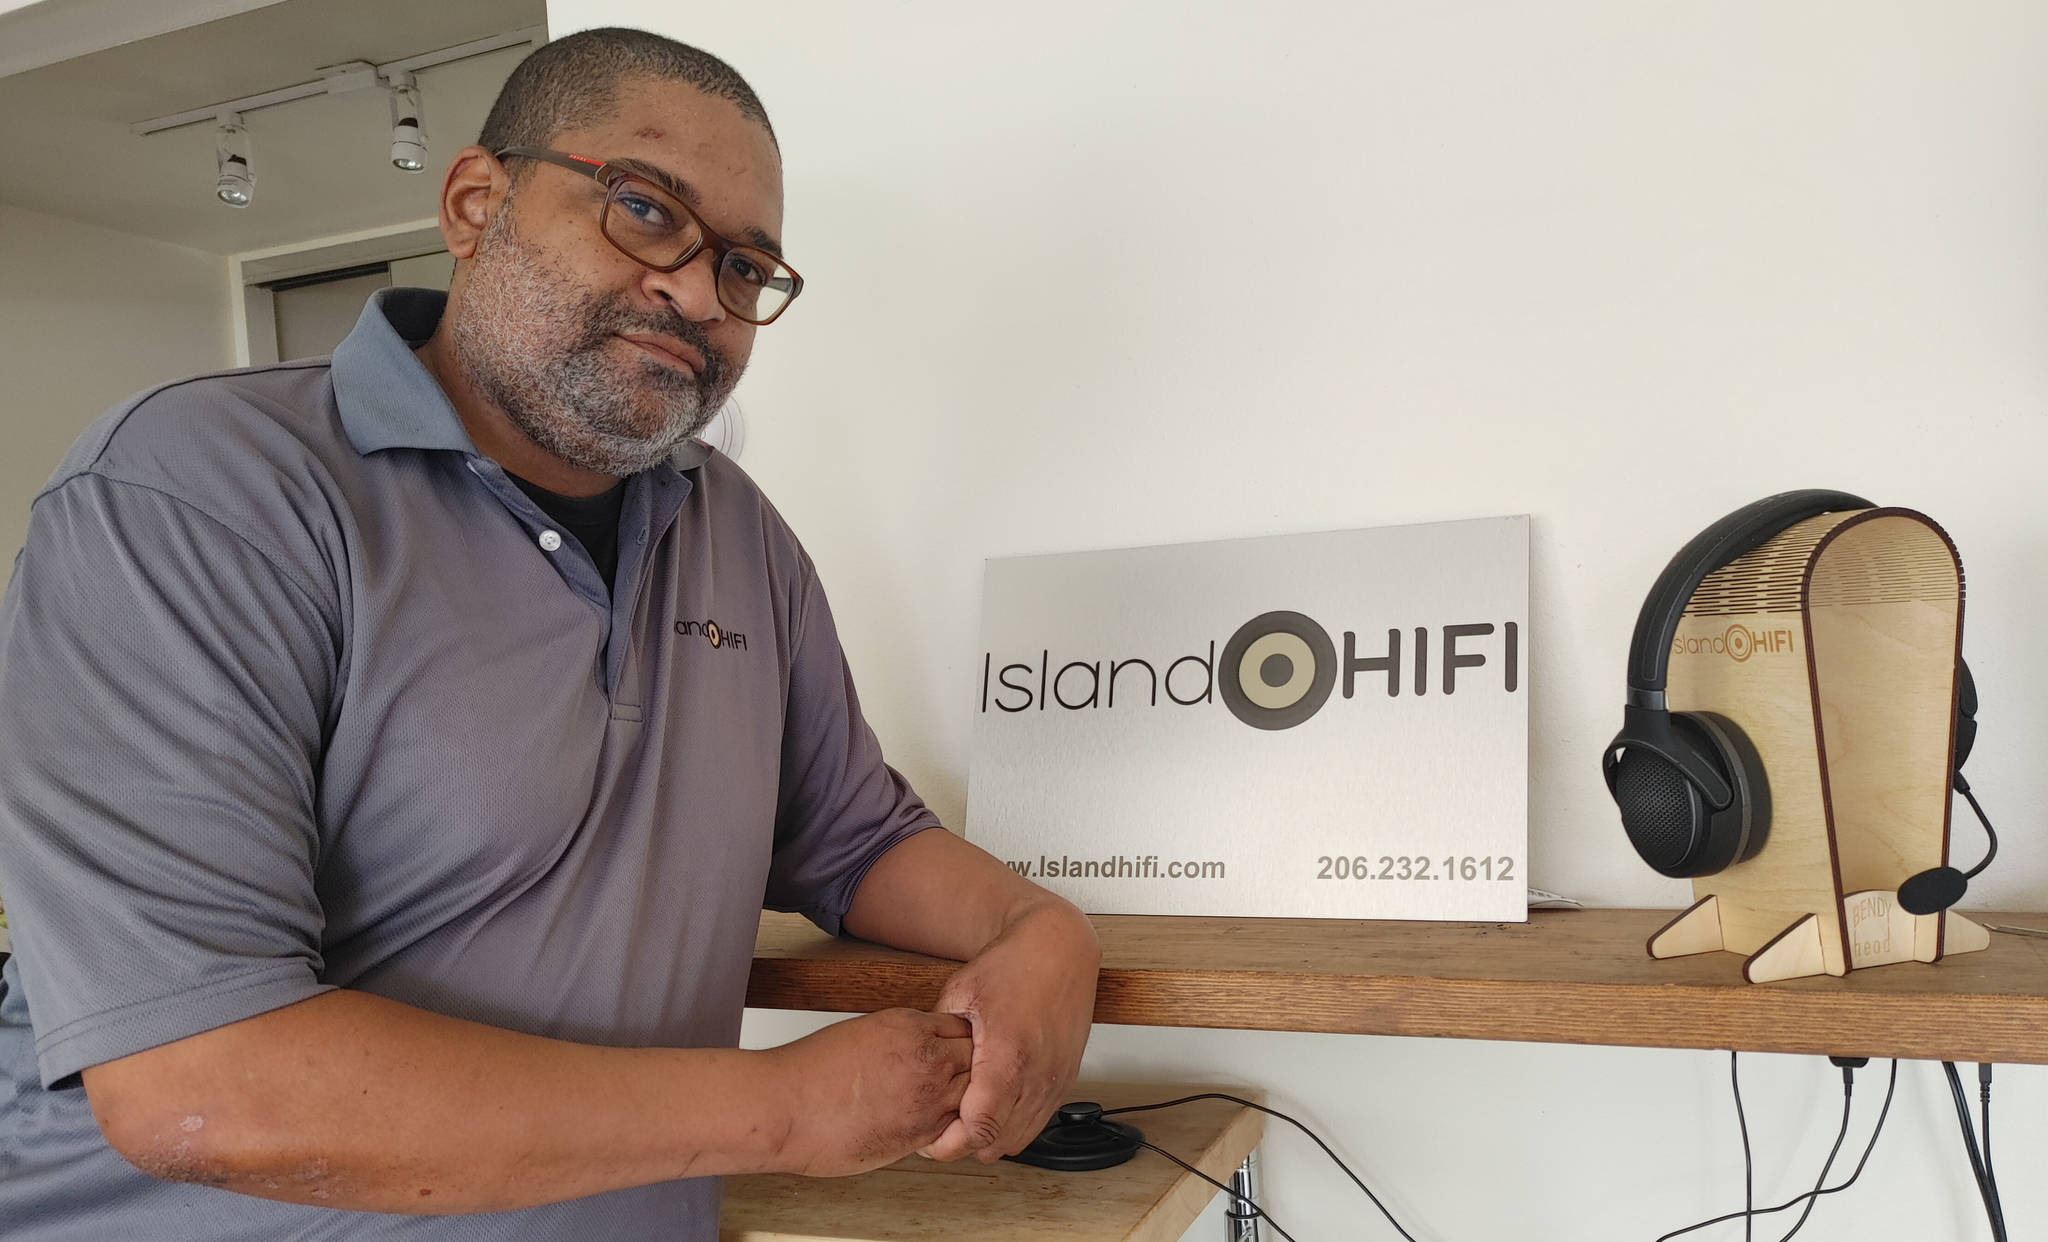 Martin Gilbert, president of Island HI FI, has been in business on Mercer Island for the last five years. Andy Nystrom/ staff photo